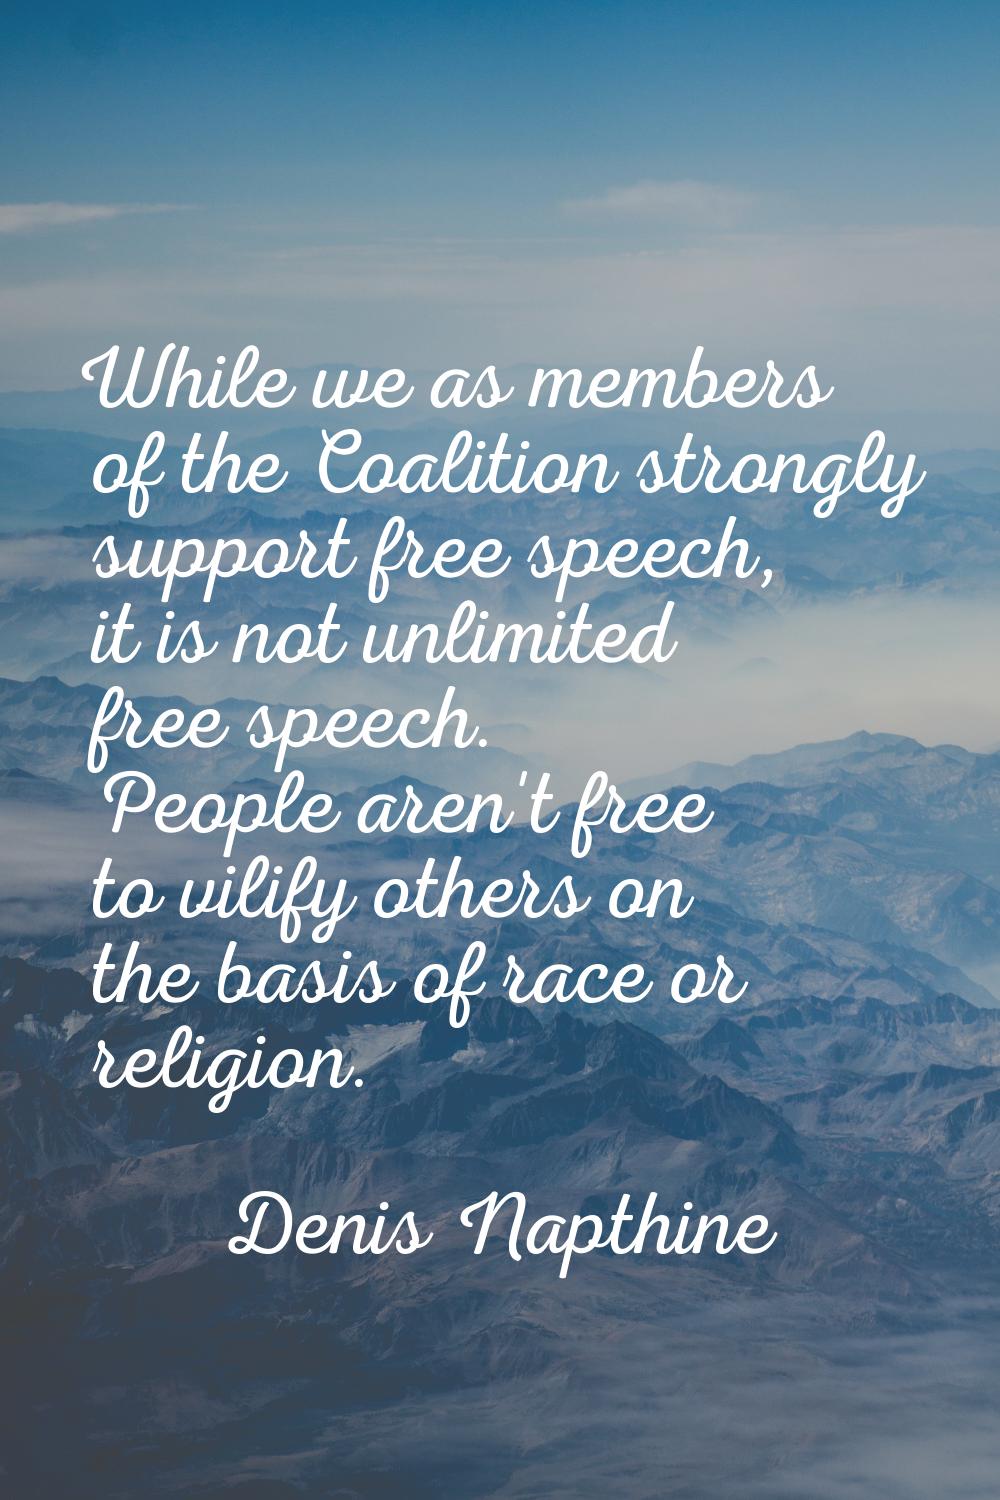 While we as members of the Coalition strongly support free speech, it is not unlimited free speech.